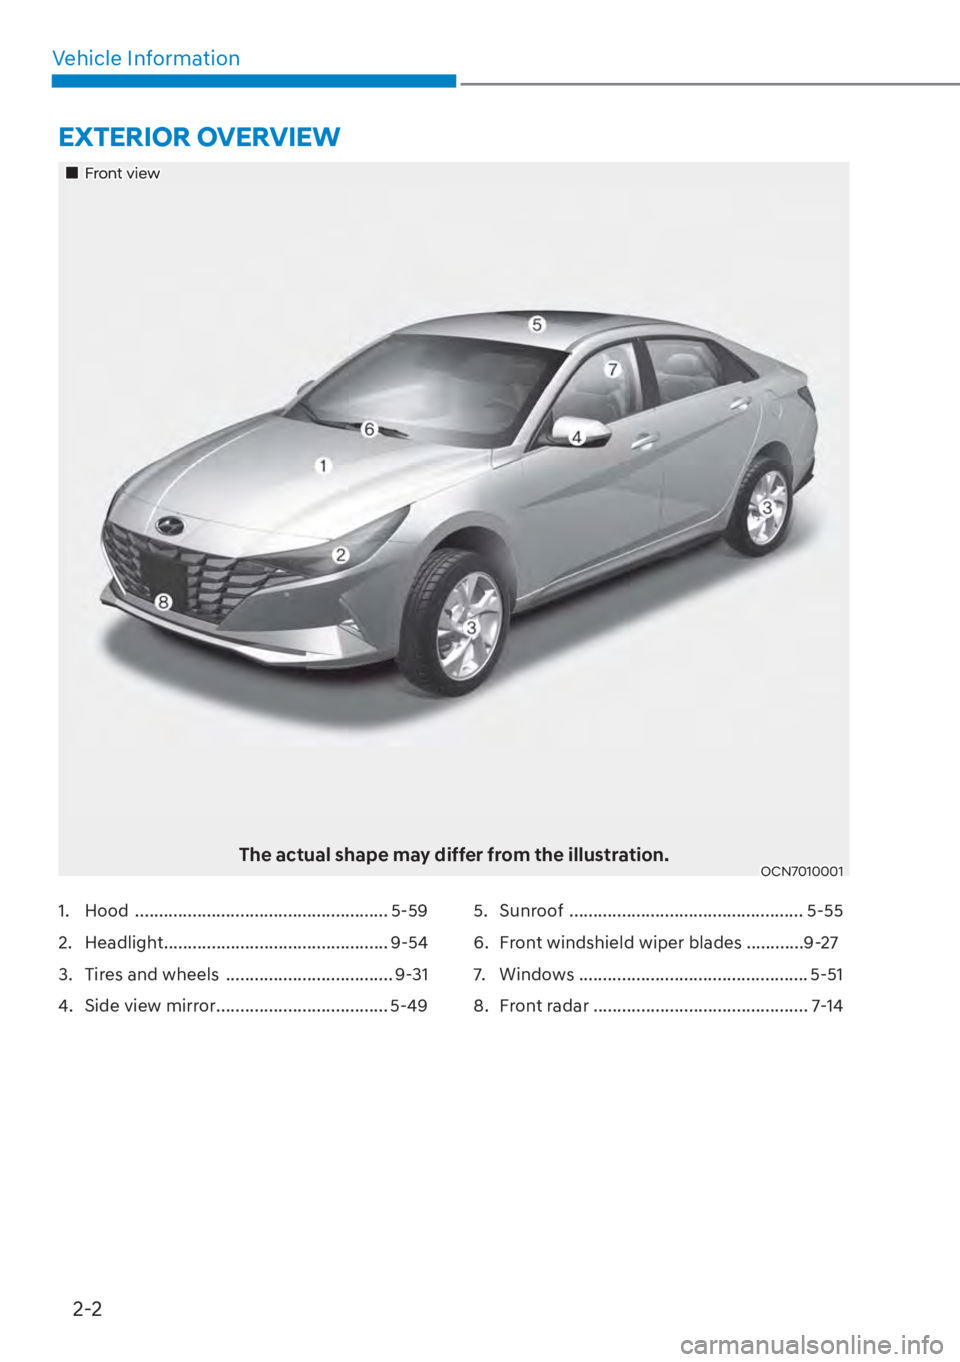 HYUNDAI ELANTRA 2023  Owners Manual 2-2
Vehicle Information
EXTERIOR OVERVIEW
��„Front view
The actual shape may differ from the illustration.OCN7010001
1. Hood  ..................................................... 5-59
2. Headlight